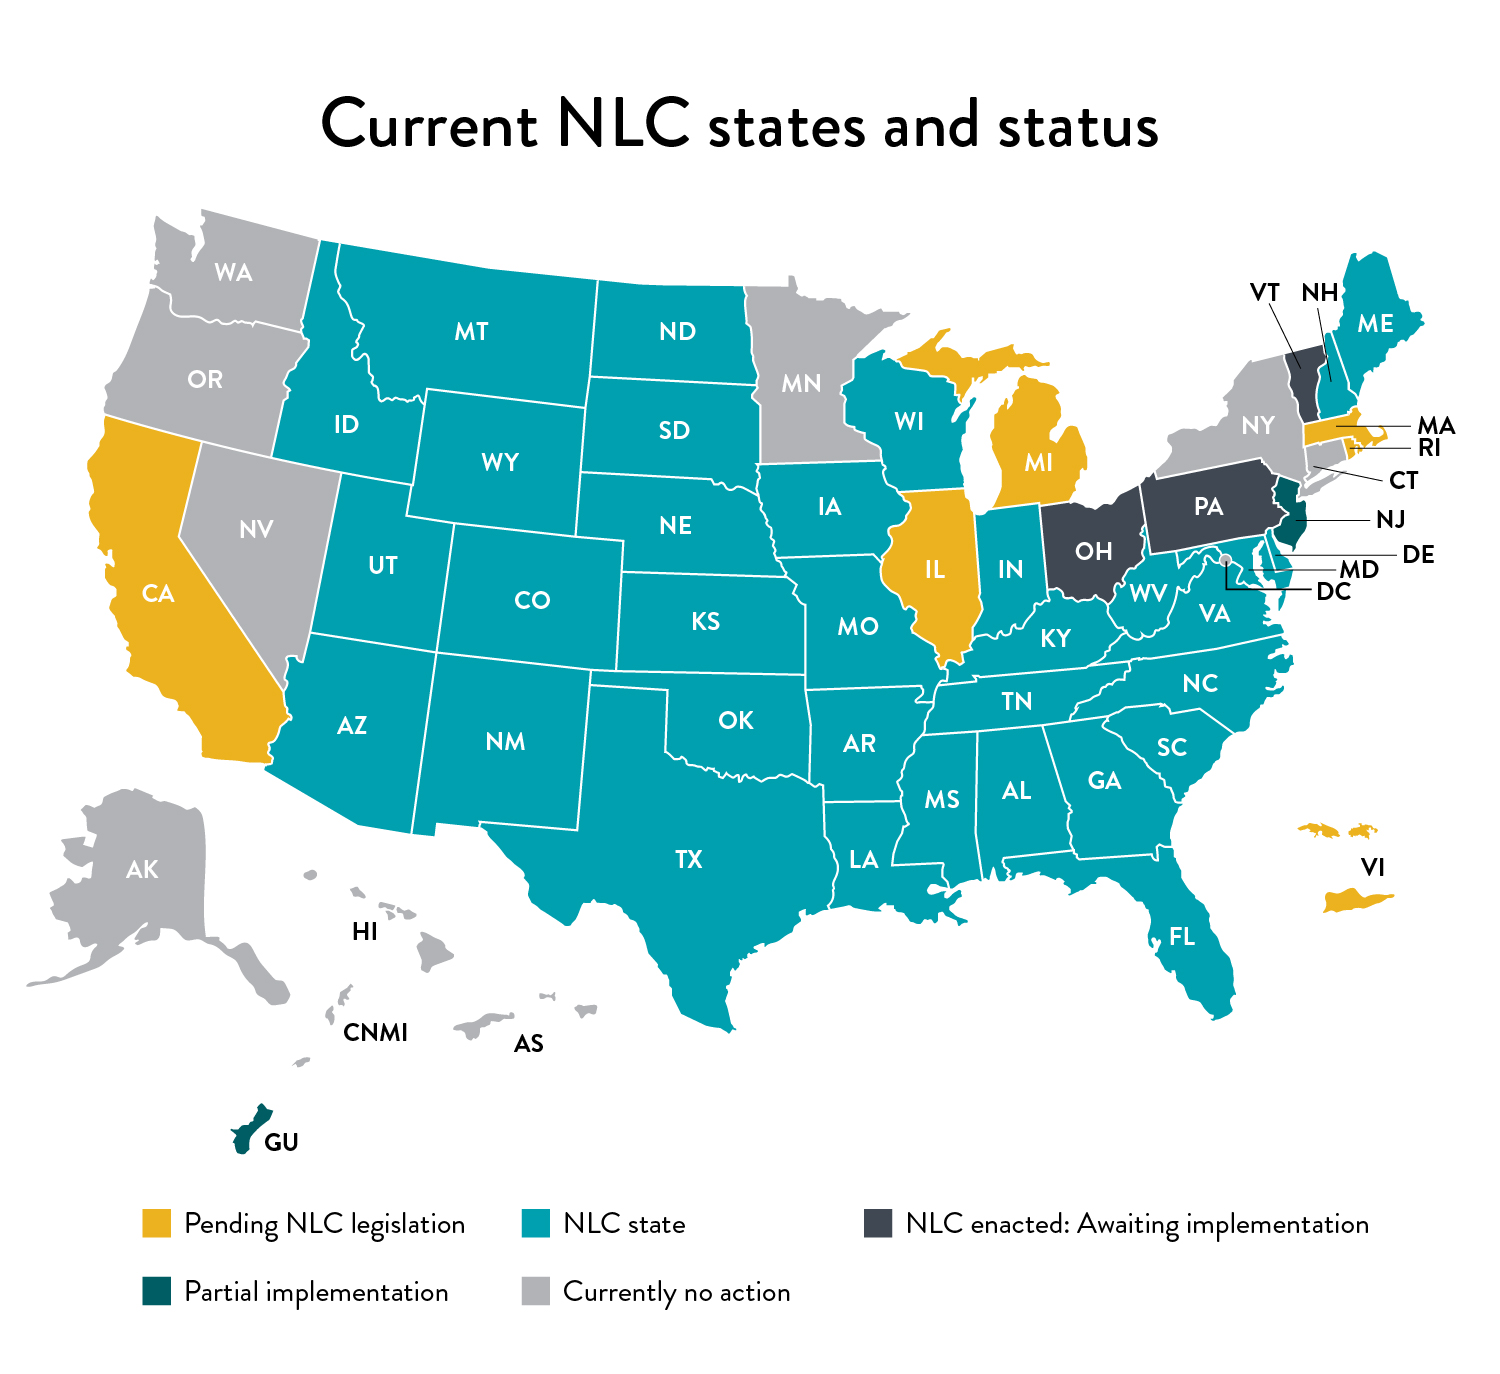 NLC states map as of 11/1/2021